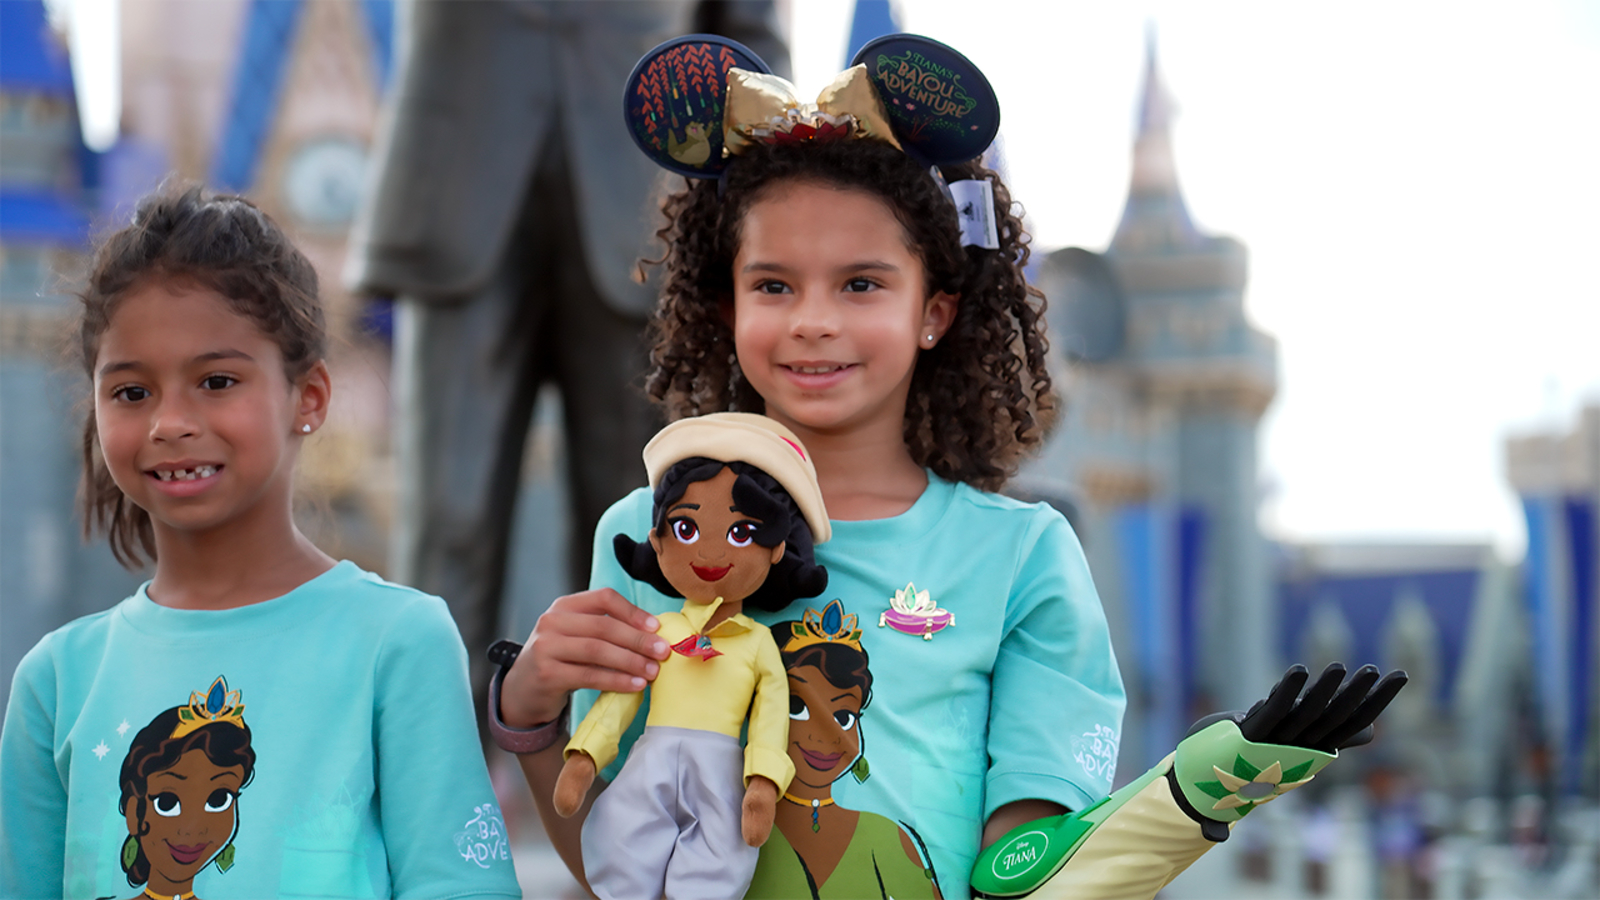 Girl with limb difference surprised with bionic arm cover inspired by Princess Tiana [Video]